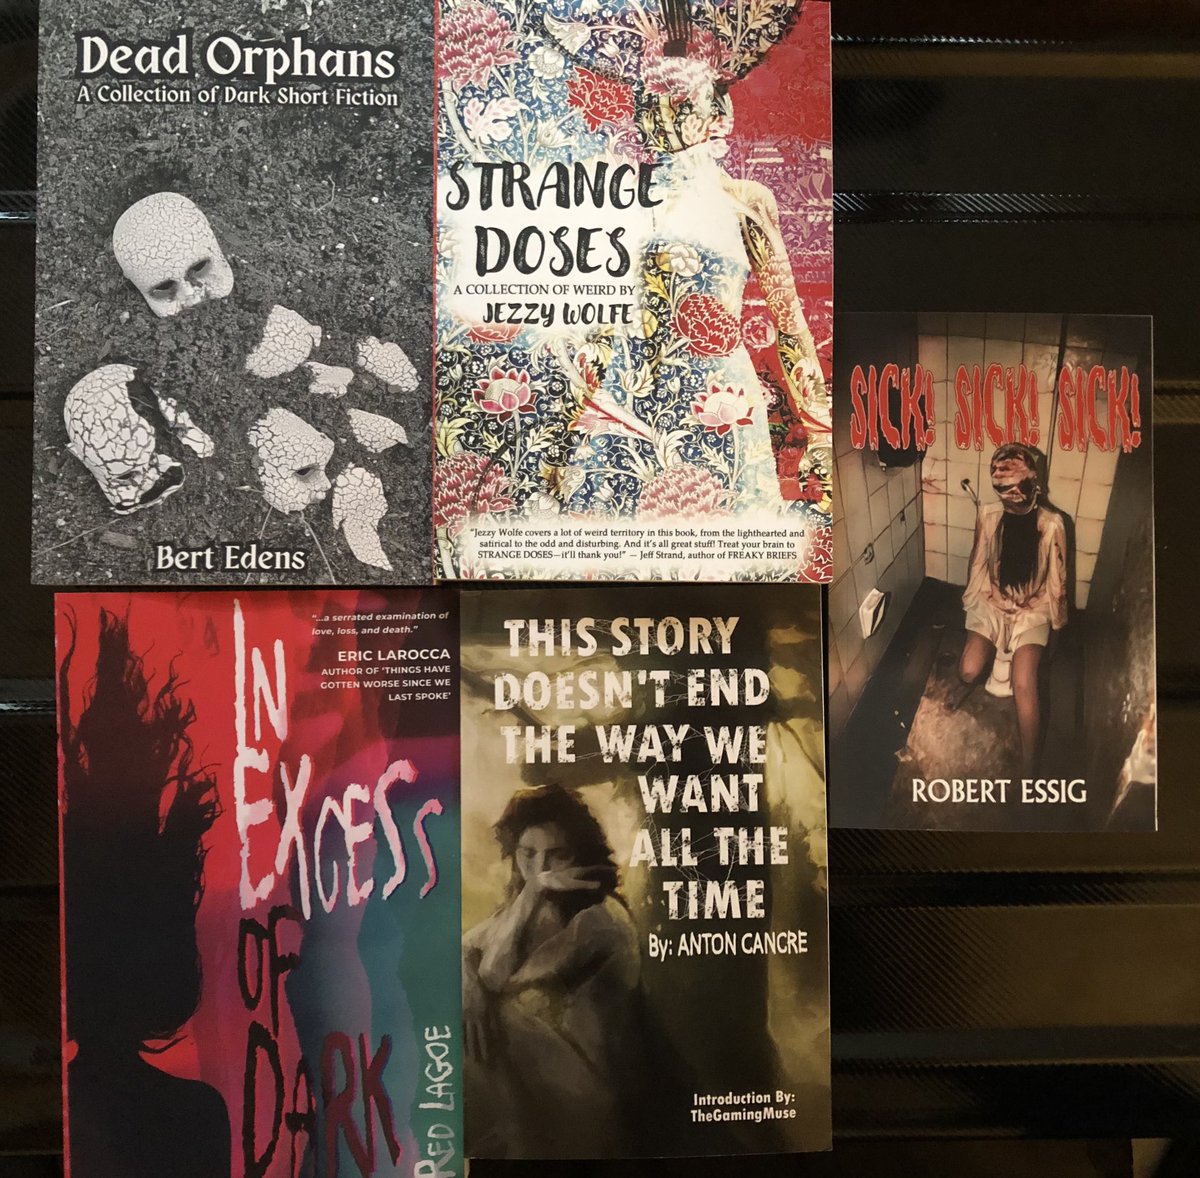 AuthorCon III book haul.

We also secured a copy of The Day of the Door by Laurel Hightower for Carrie, not pictured here because she is currently reading it.

#authorcon #scaresthatcare #fightrealmonsters